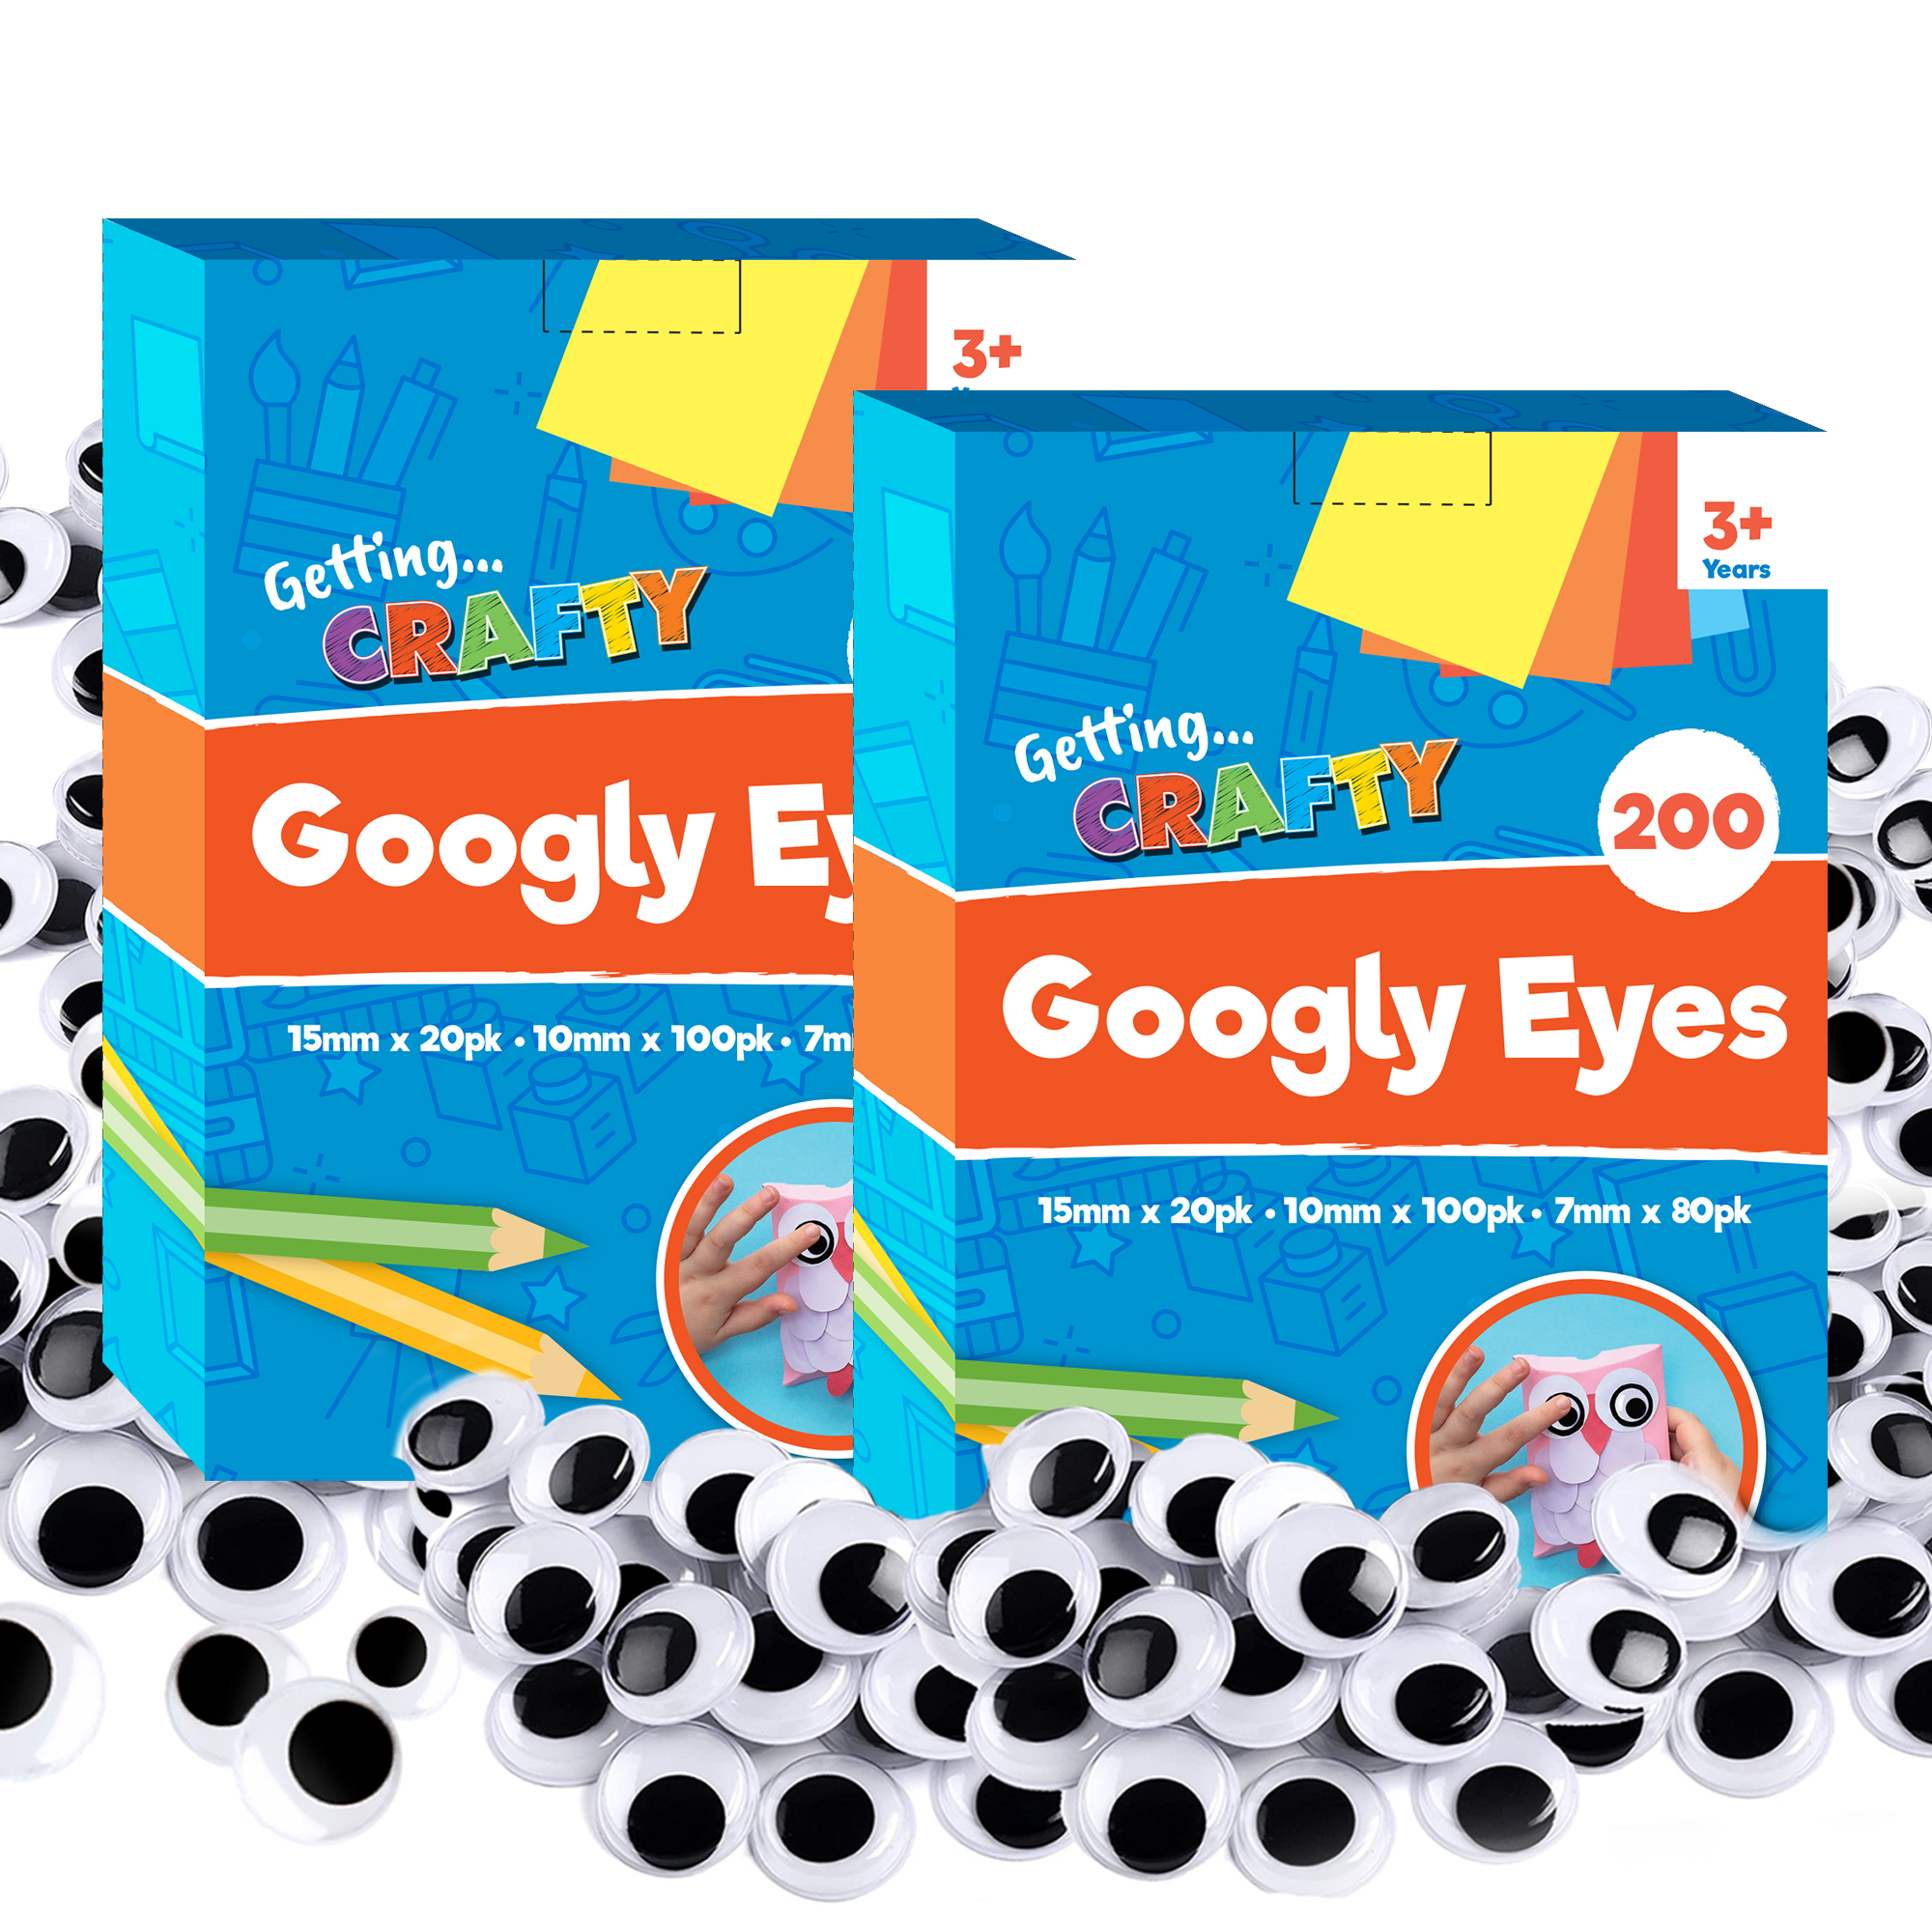 Creativity Street Large Quantity Paste-On Wiggle Eyes – Good's Store Online